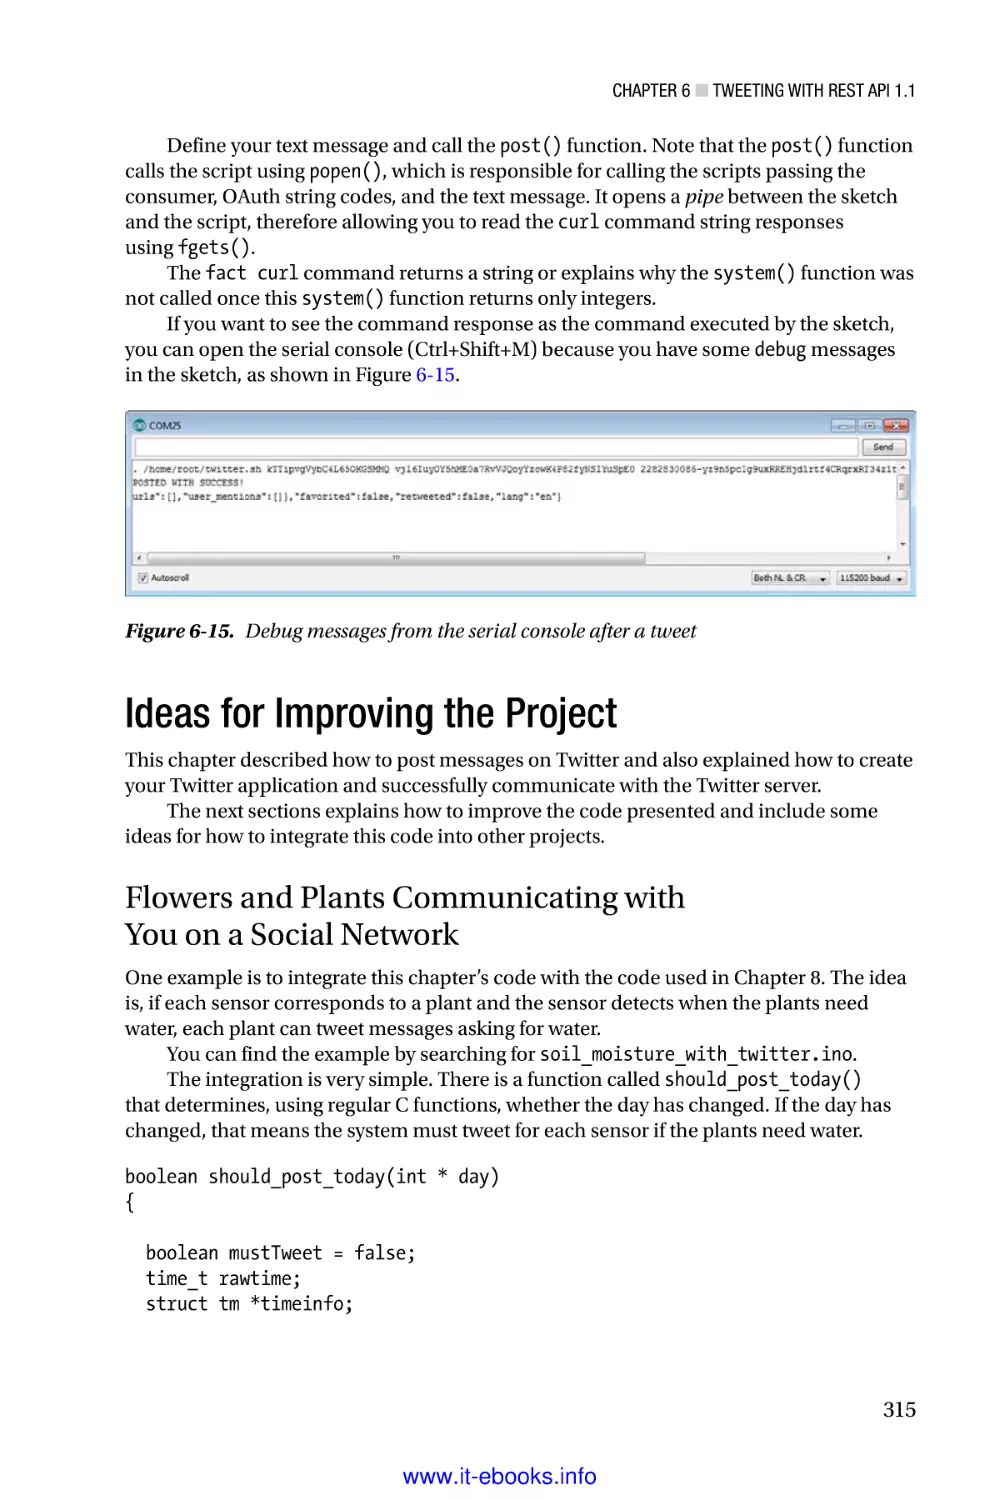 Ideas for Improving the Project
Flowers and Plants Communicating with You on a Social Network